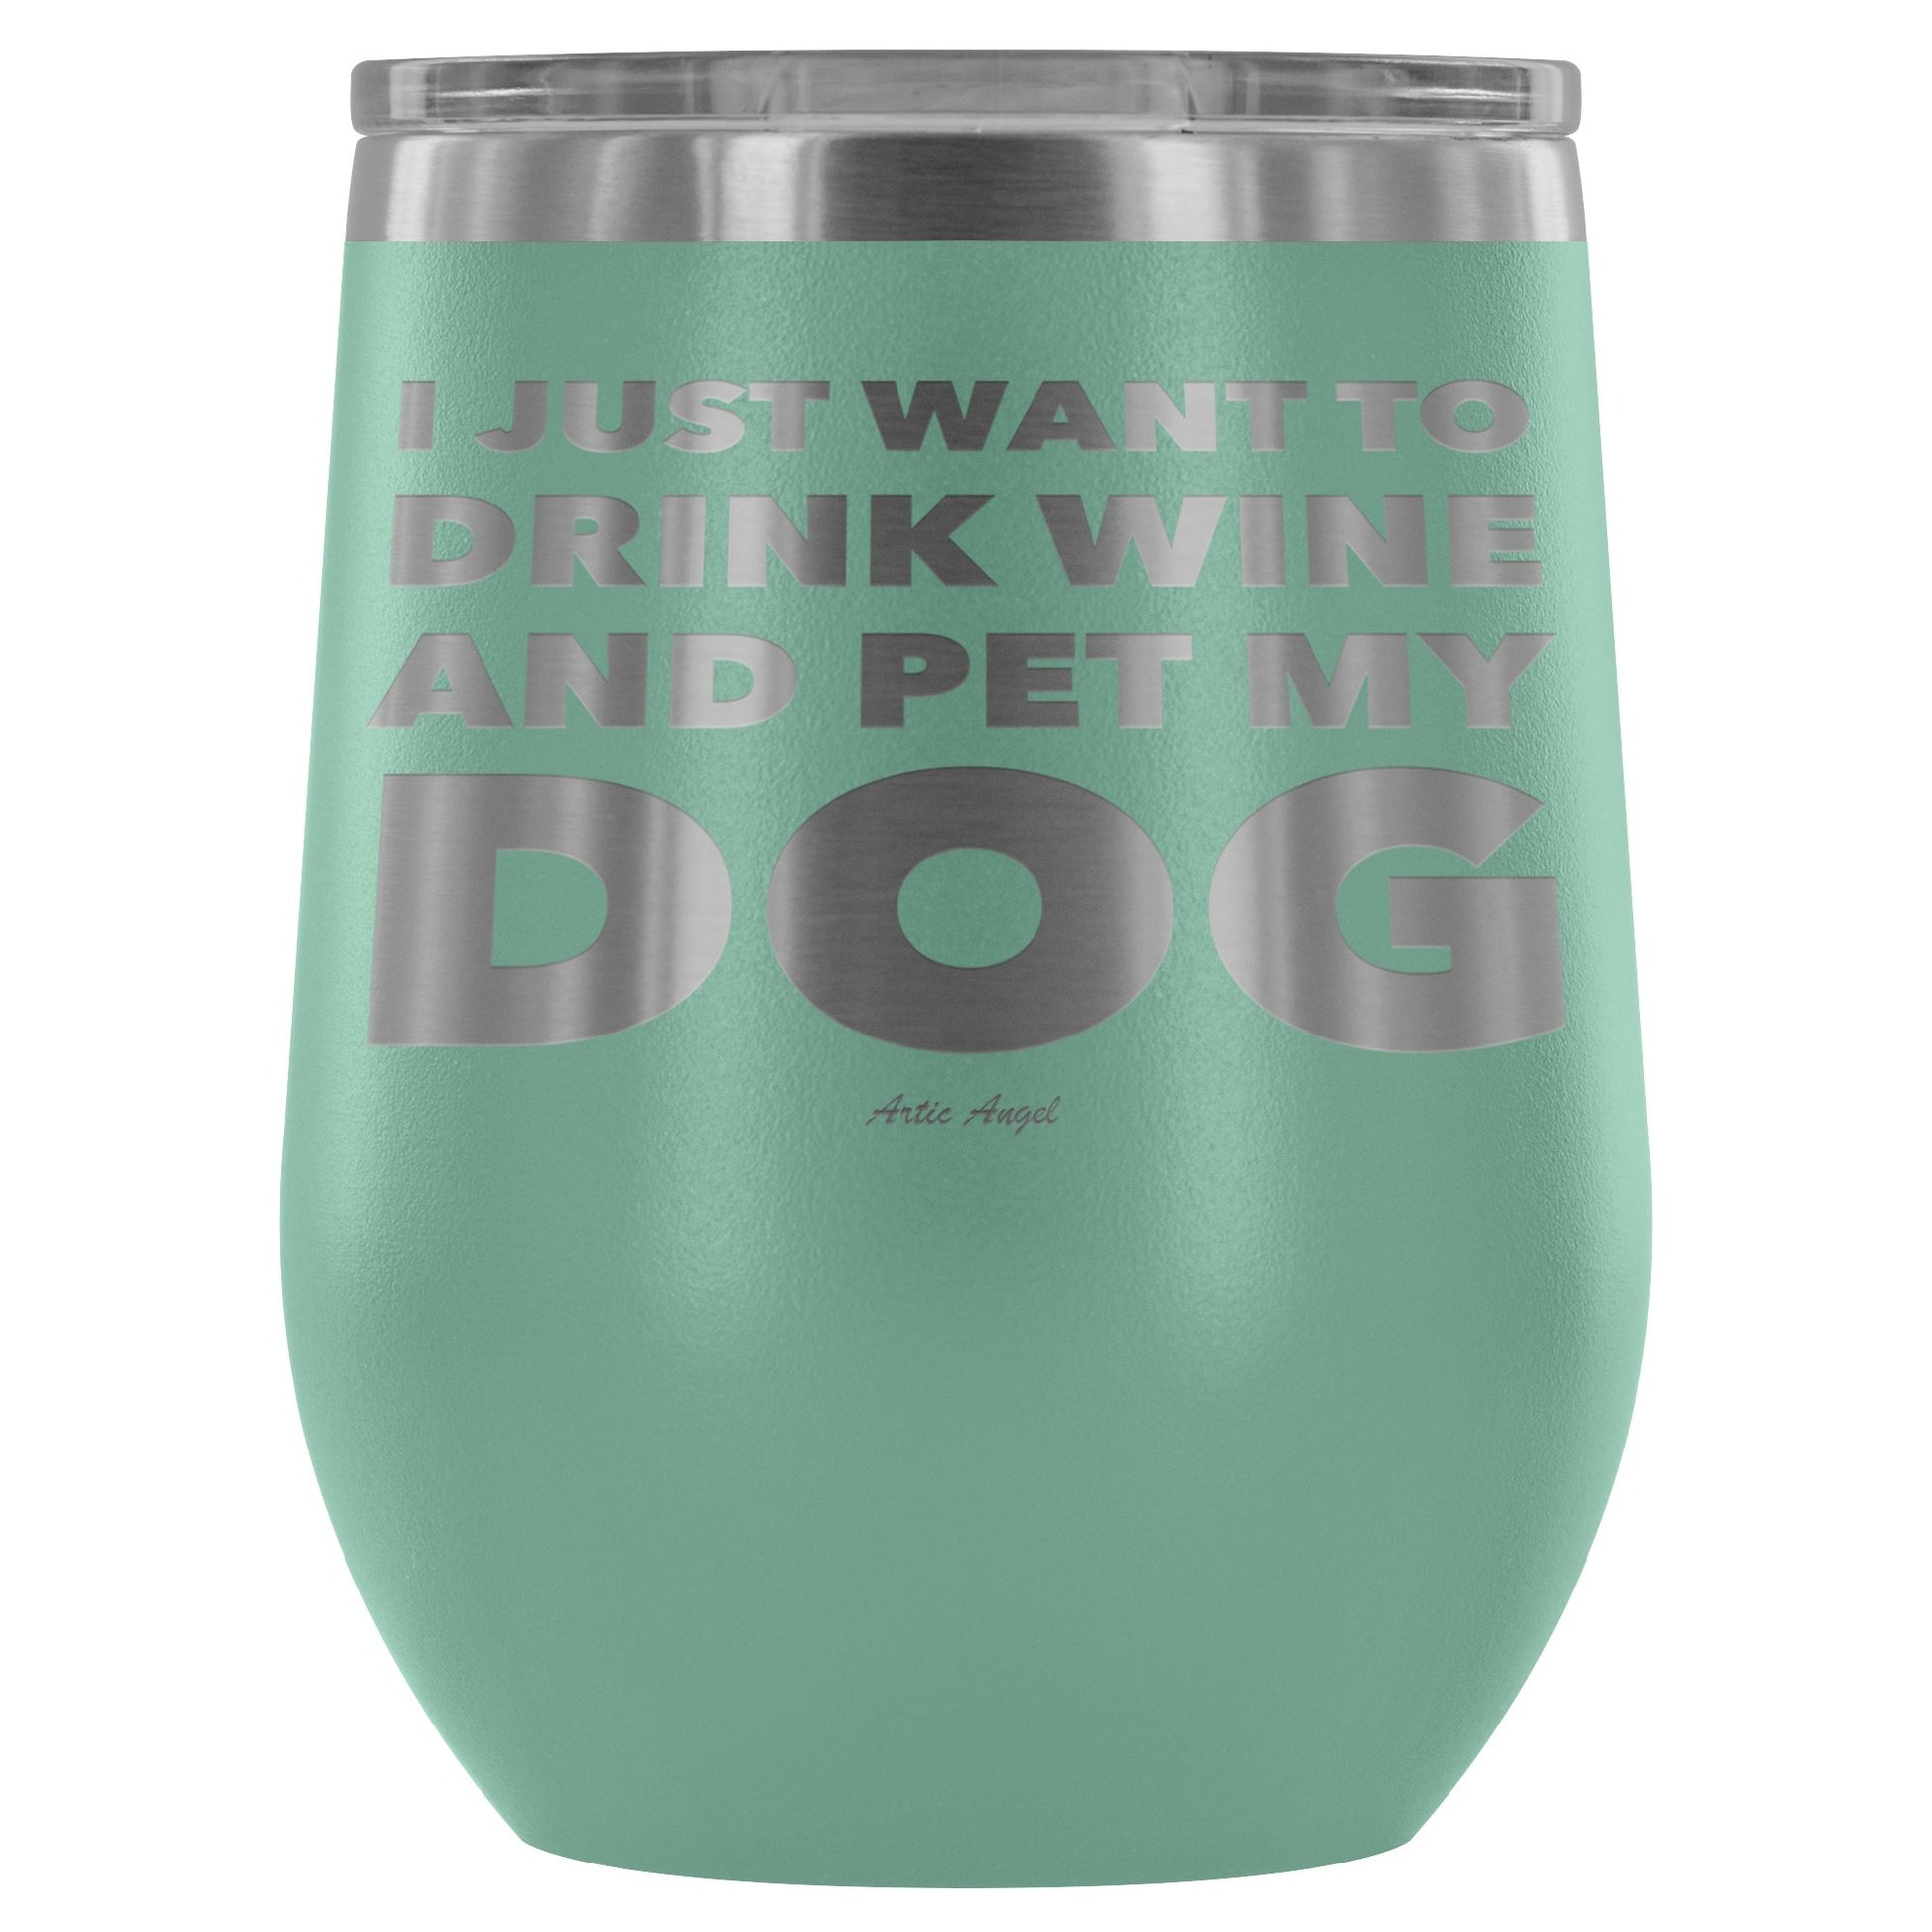 "I Just Want To Drink Wine And Pet My Dog" - Stemless Wine Cup Wine Tumbler Teal 